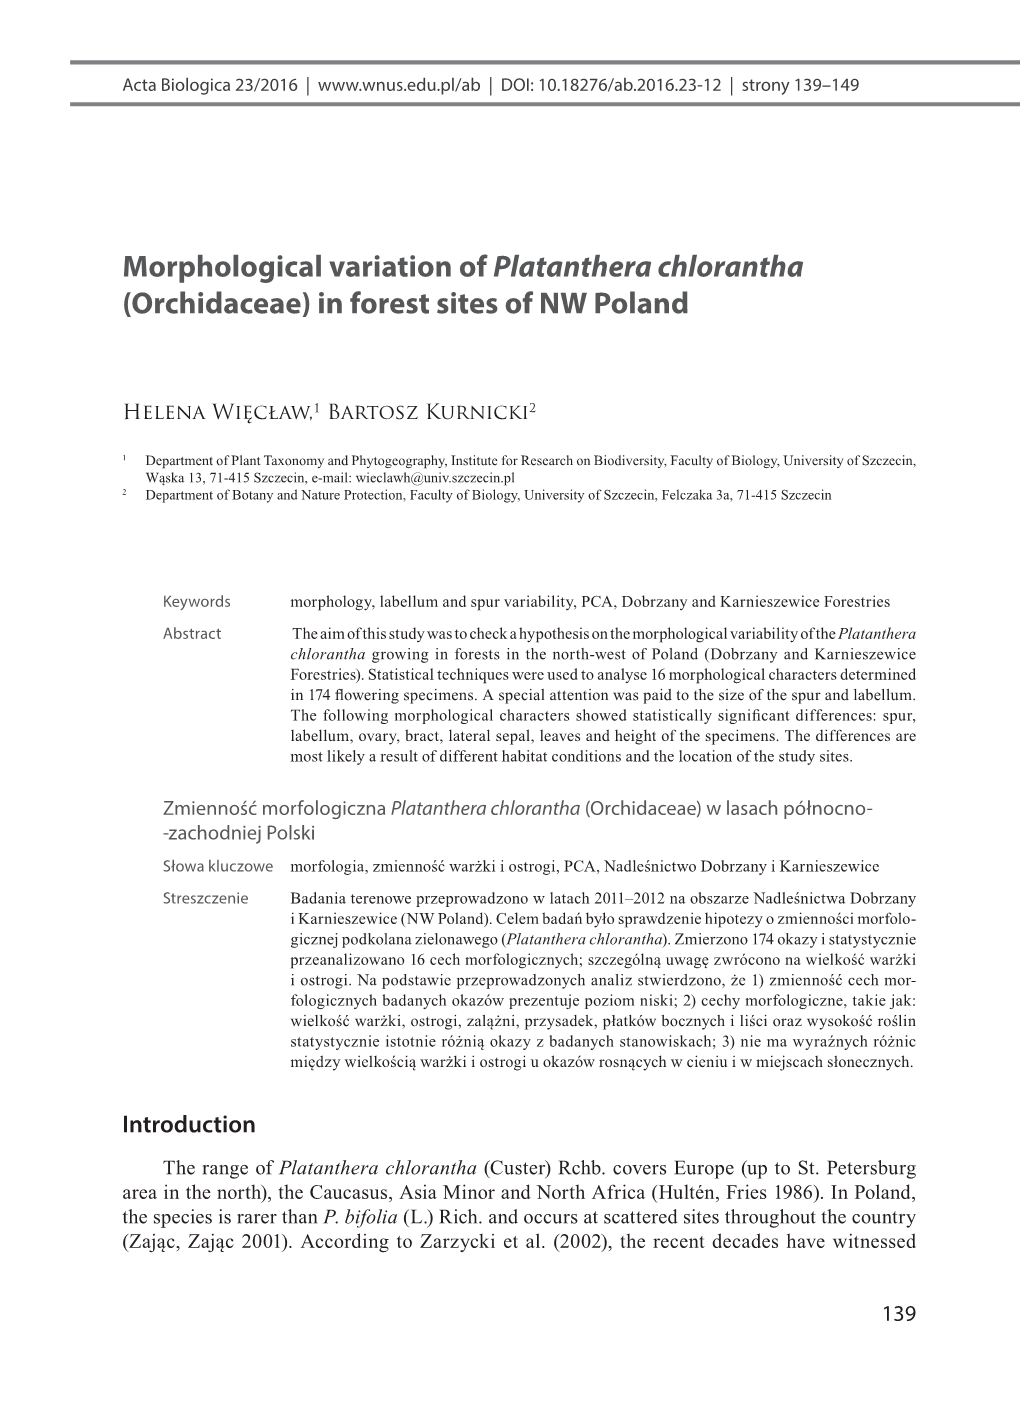 Morphological Variation of Platanthera Chlorantha (Orchidaceae) in Forest Sites of NW Poland